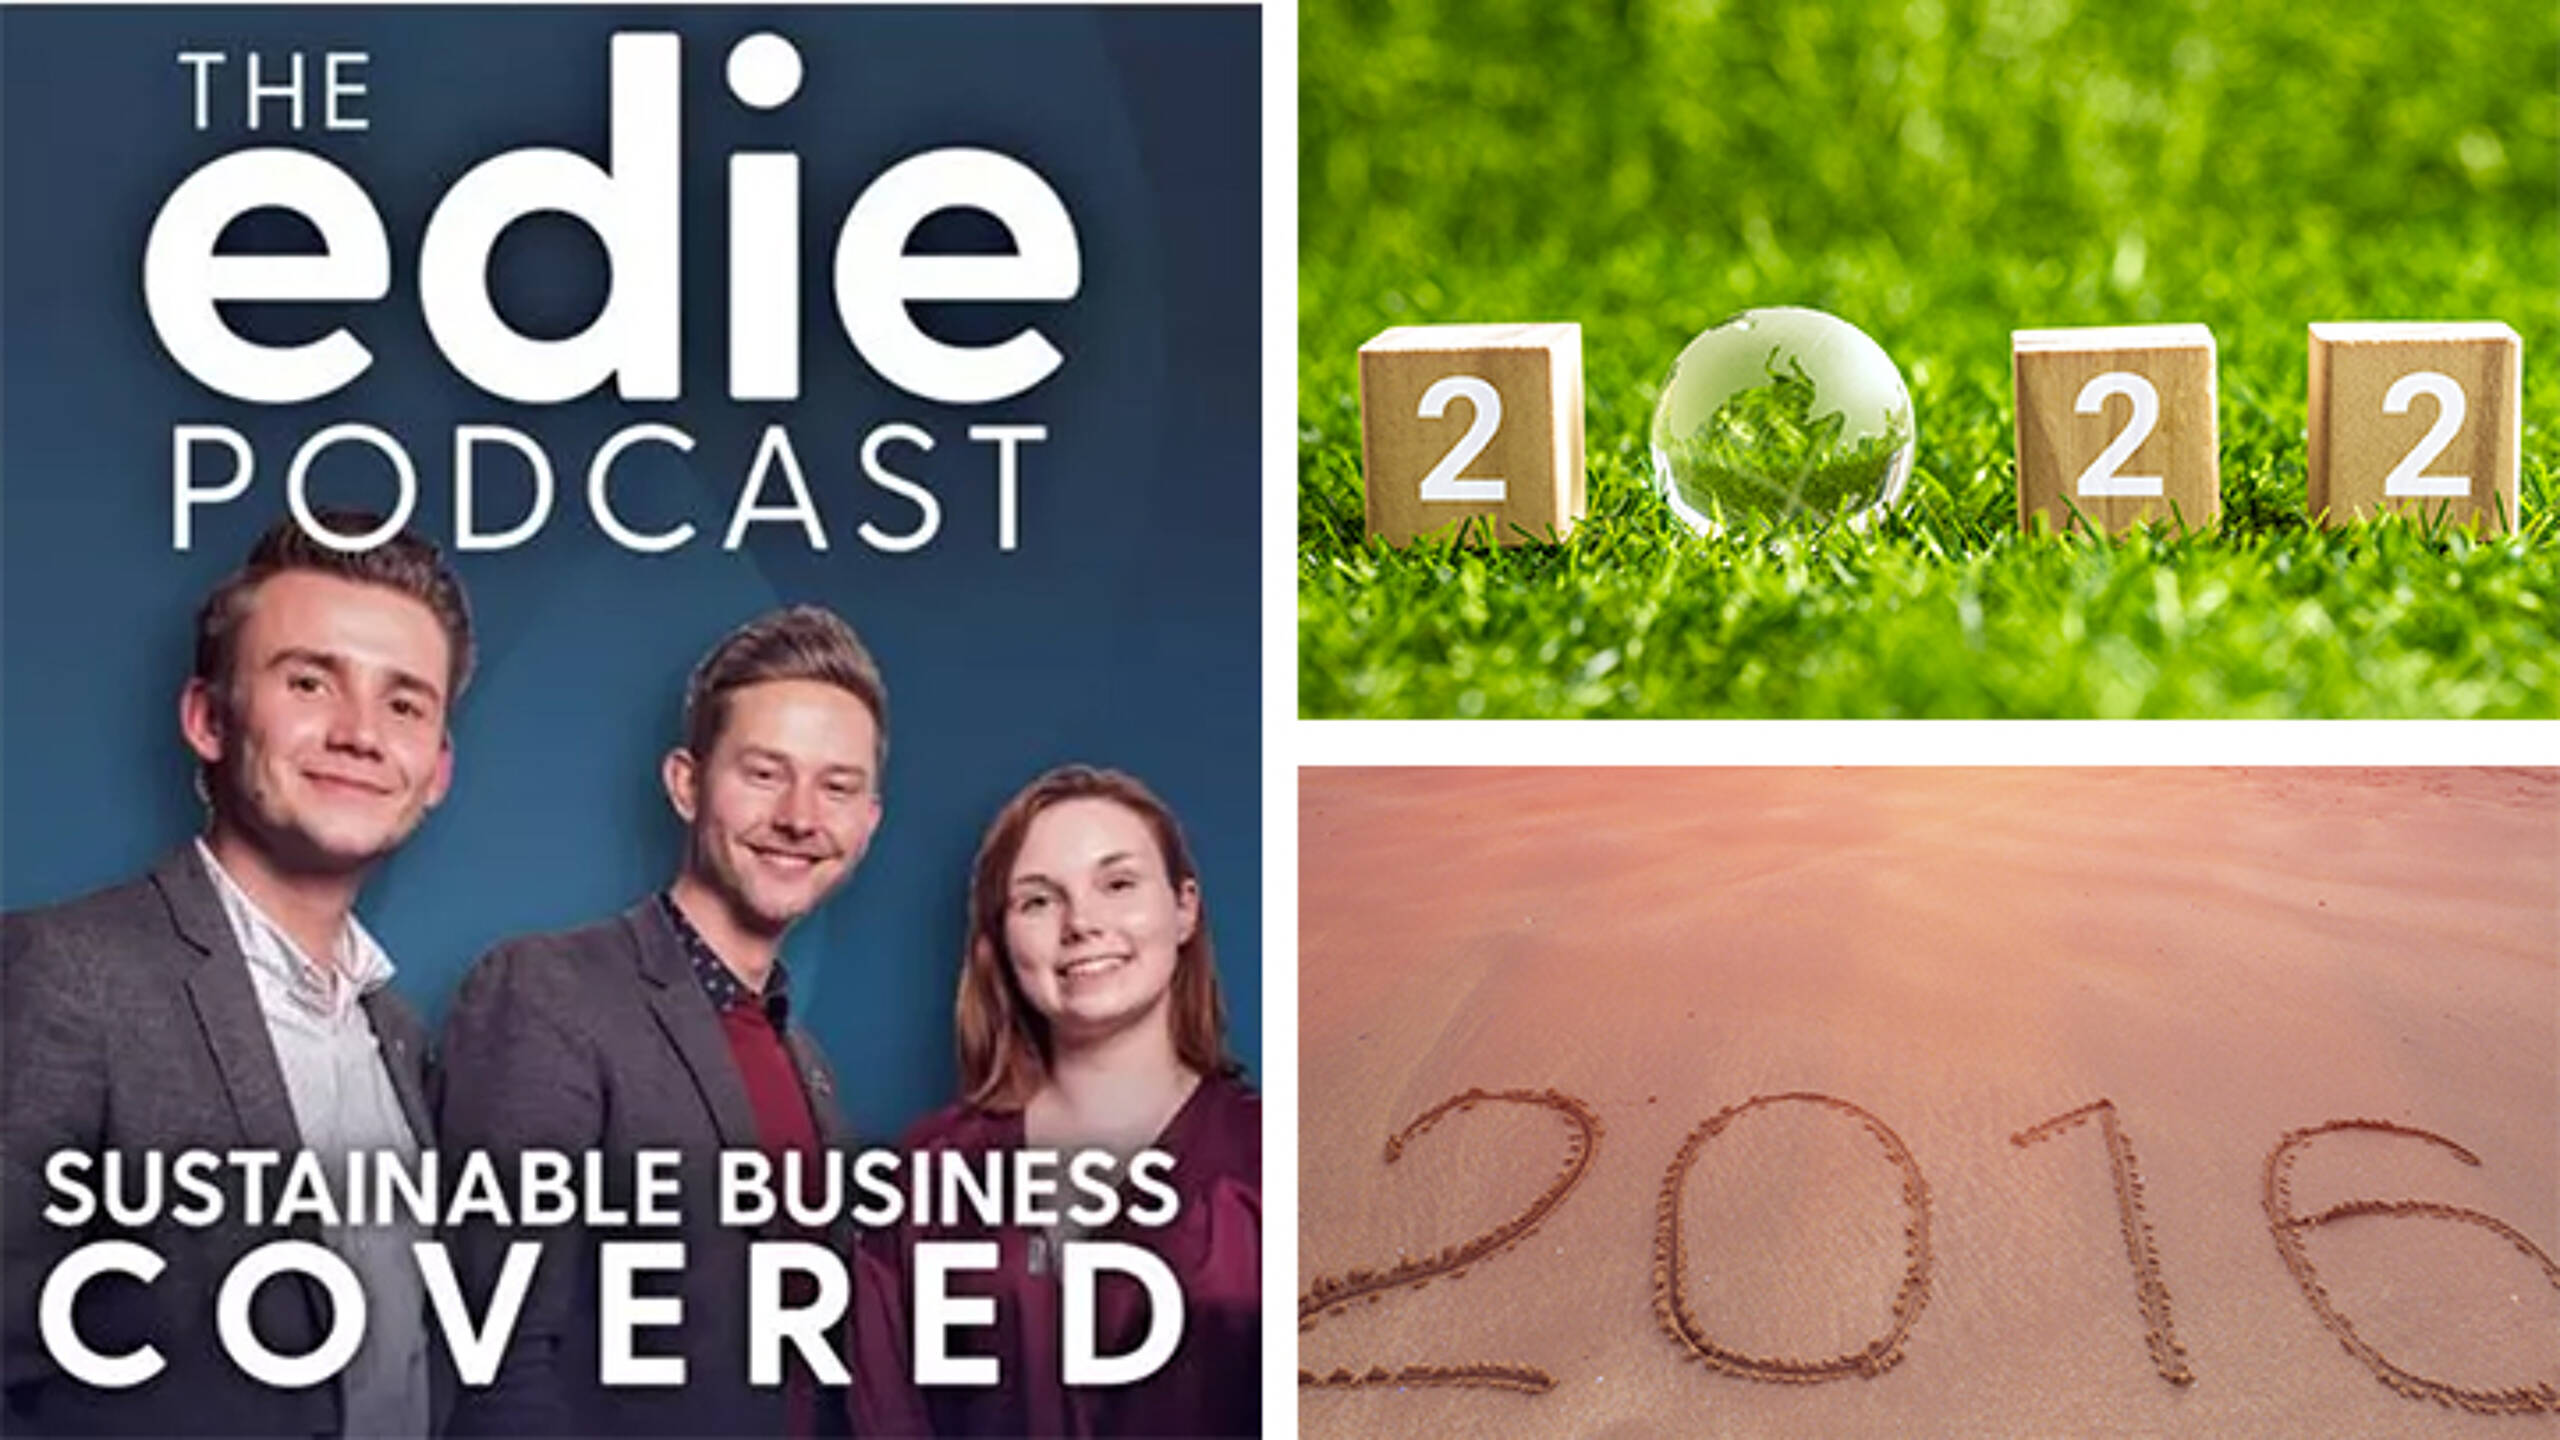 Sustainable Business Covered podcast: Reflecting on six years of sustainable business